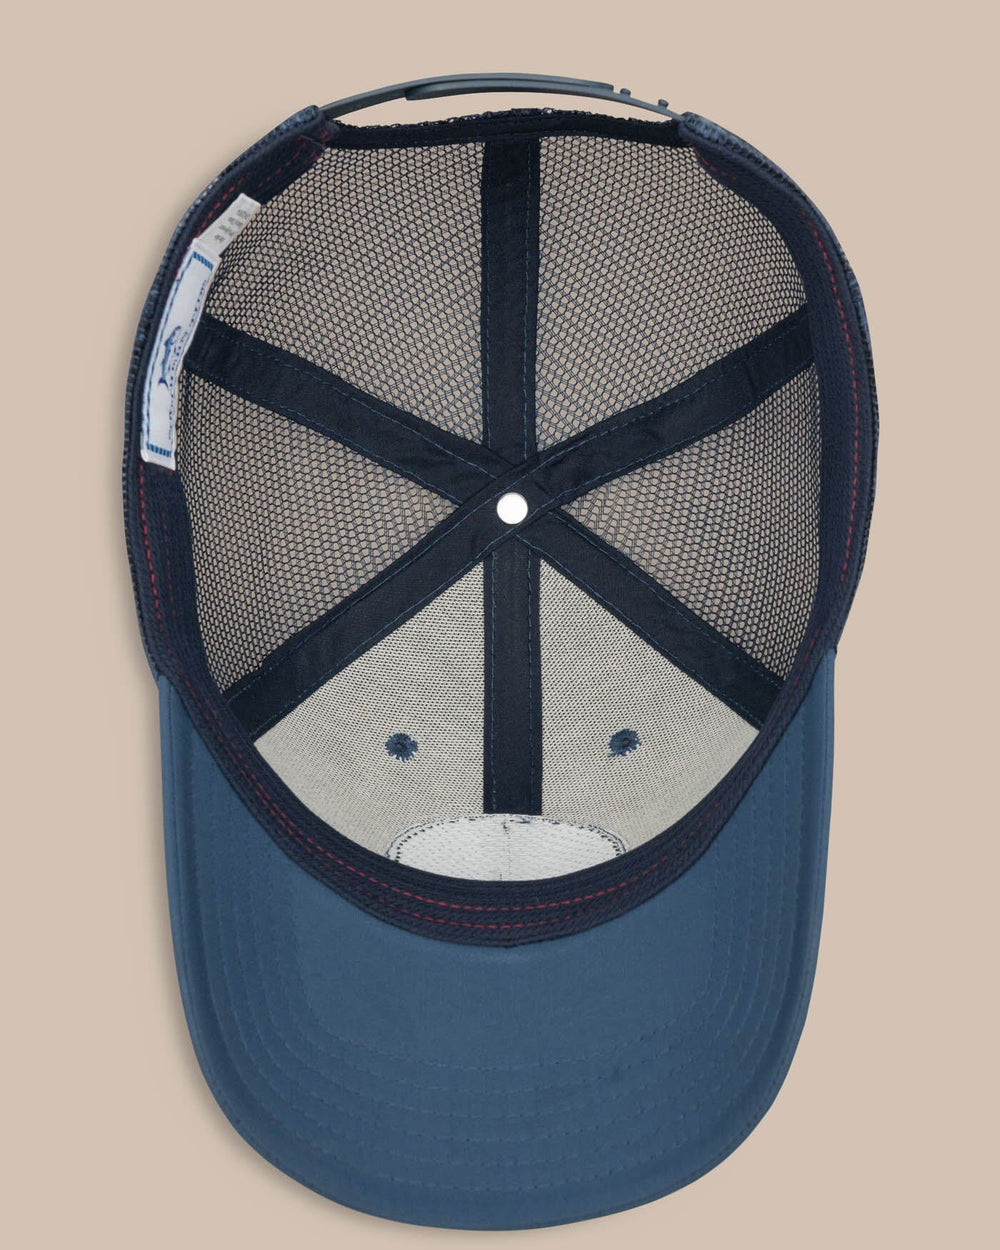 The below view of the Men's Texas Patch Performance Trucker Hat by Southern Tide - Seven Seas Blue